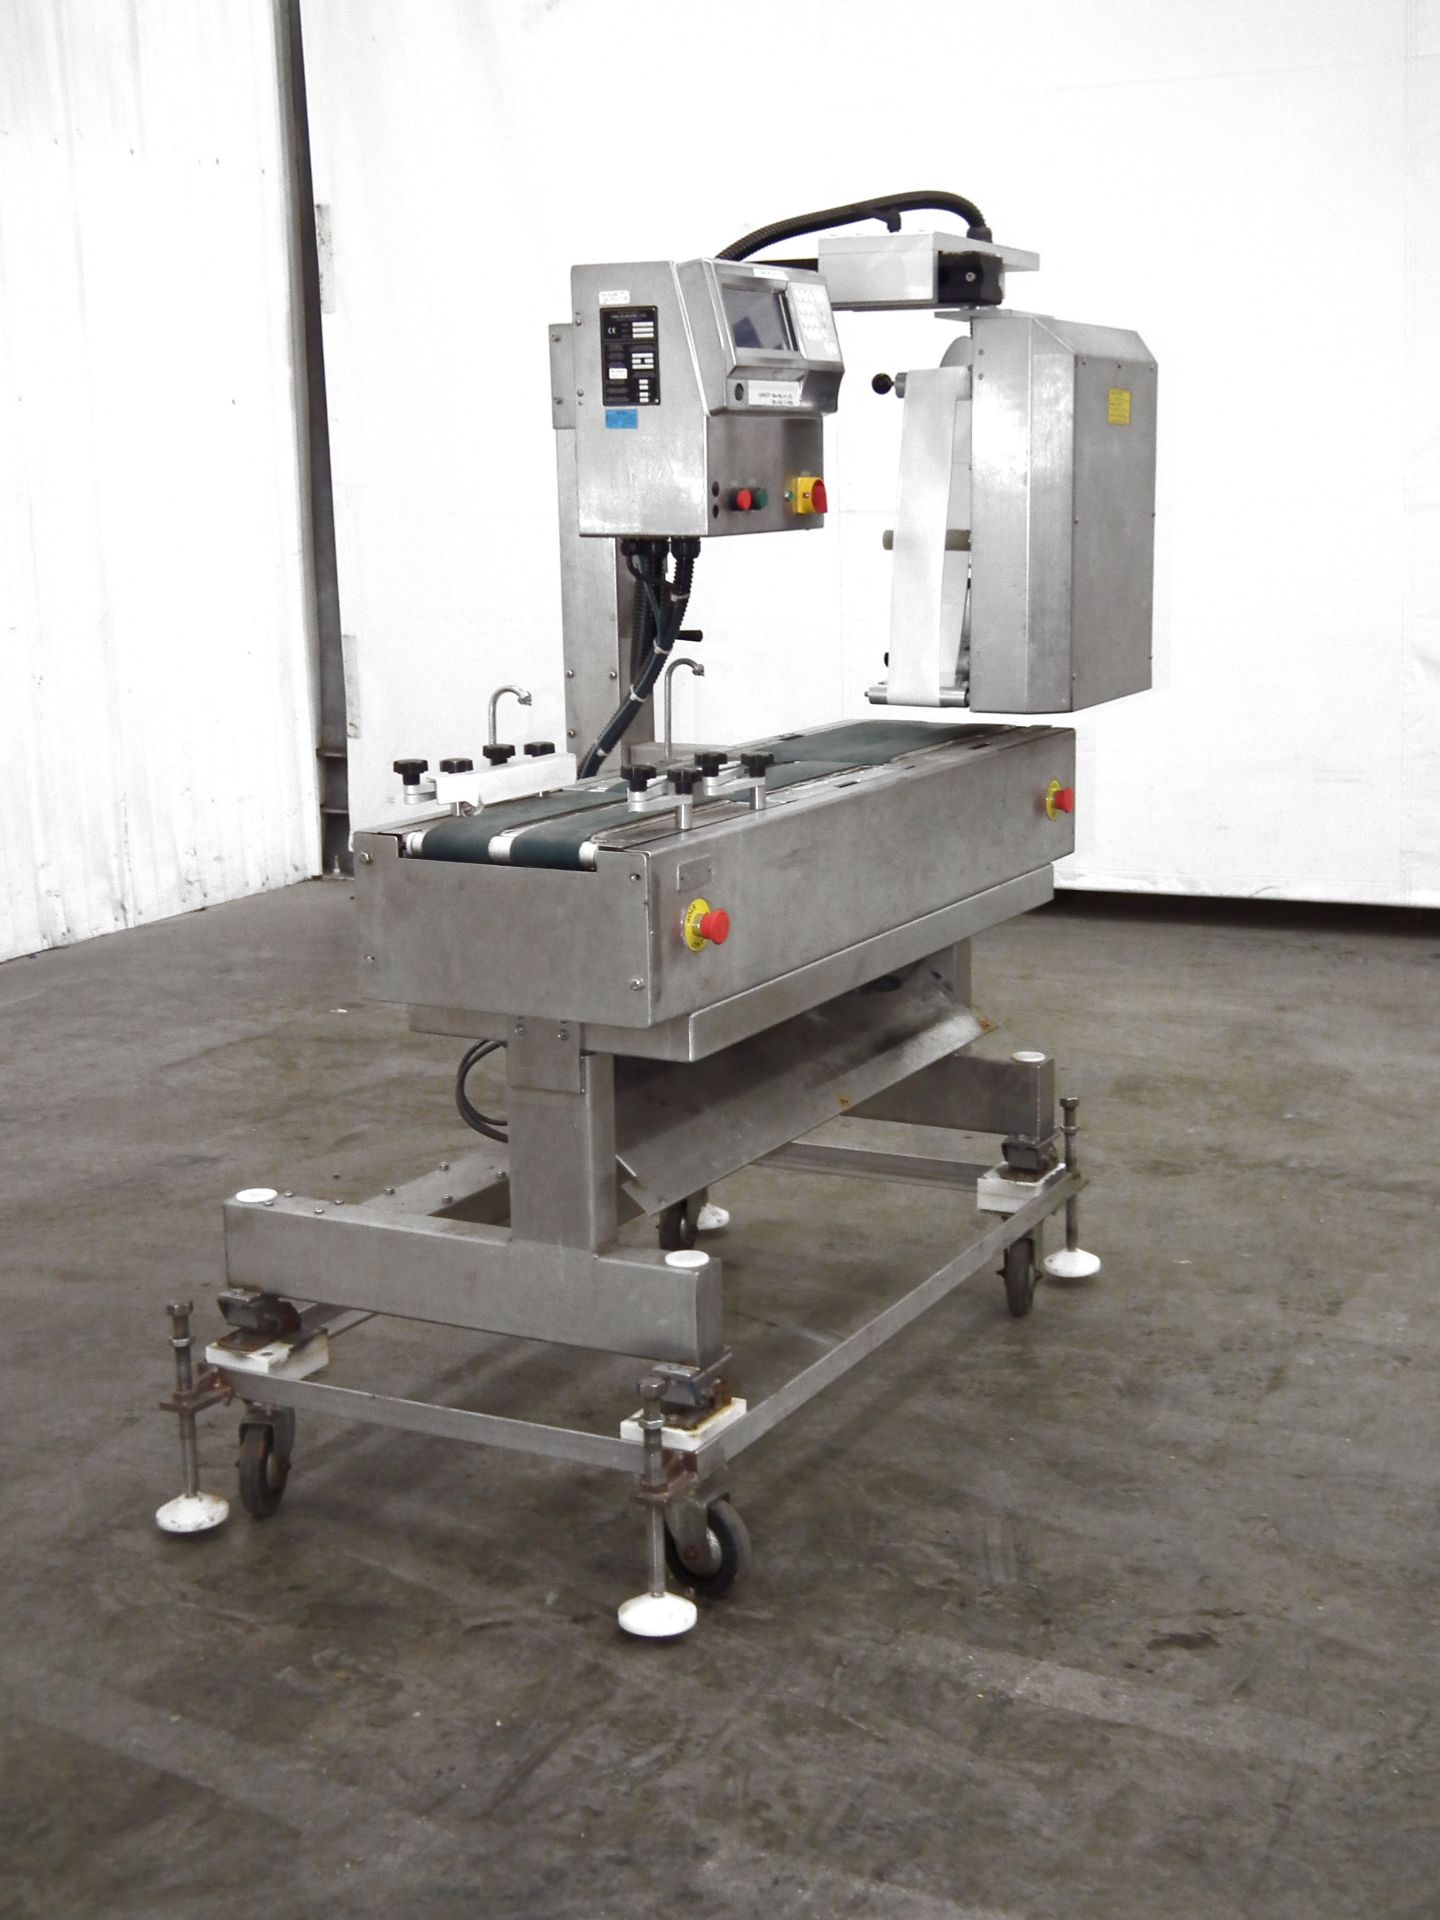 DIGIEurope MI2600 Checkweigher with Labeler B5279 - Image 4 of 10